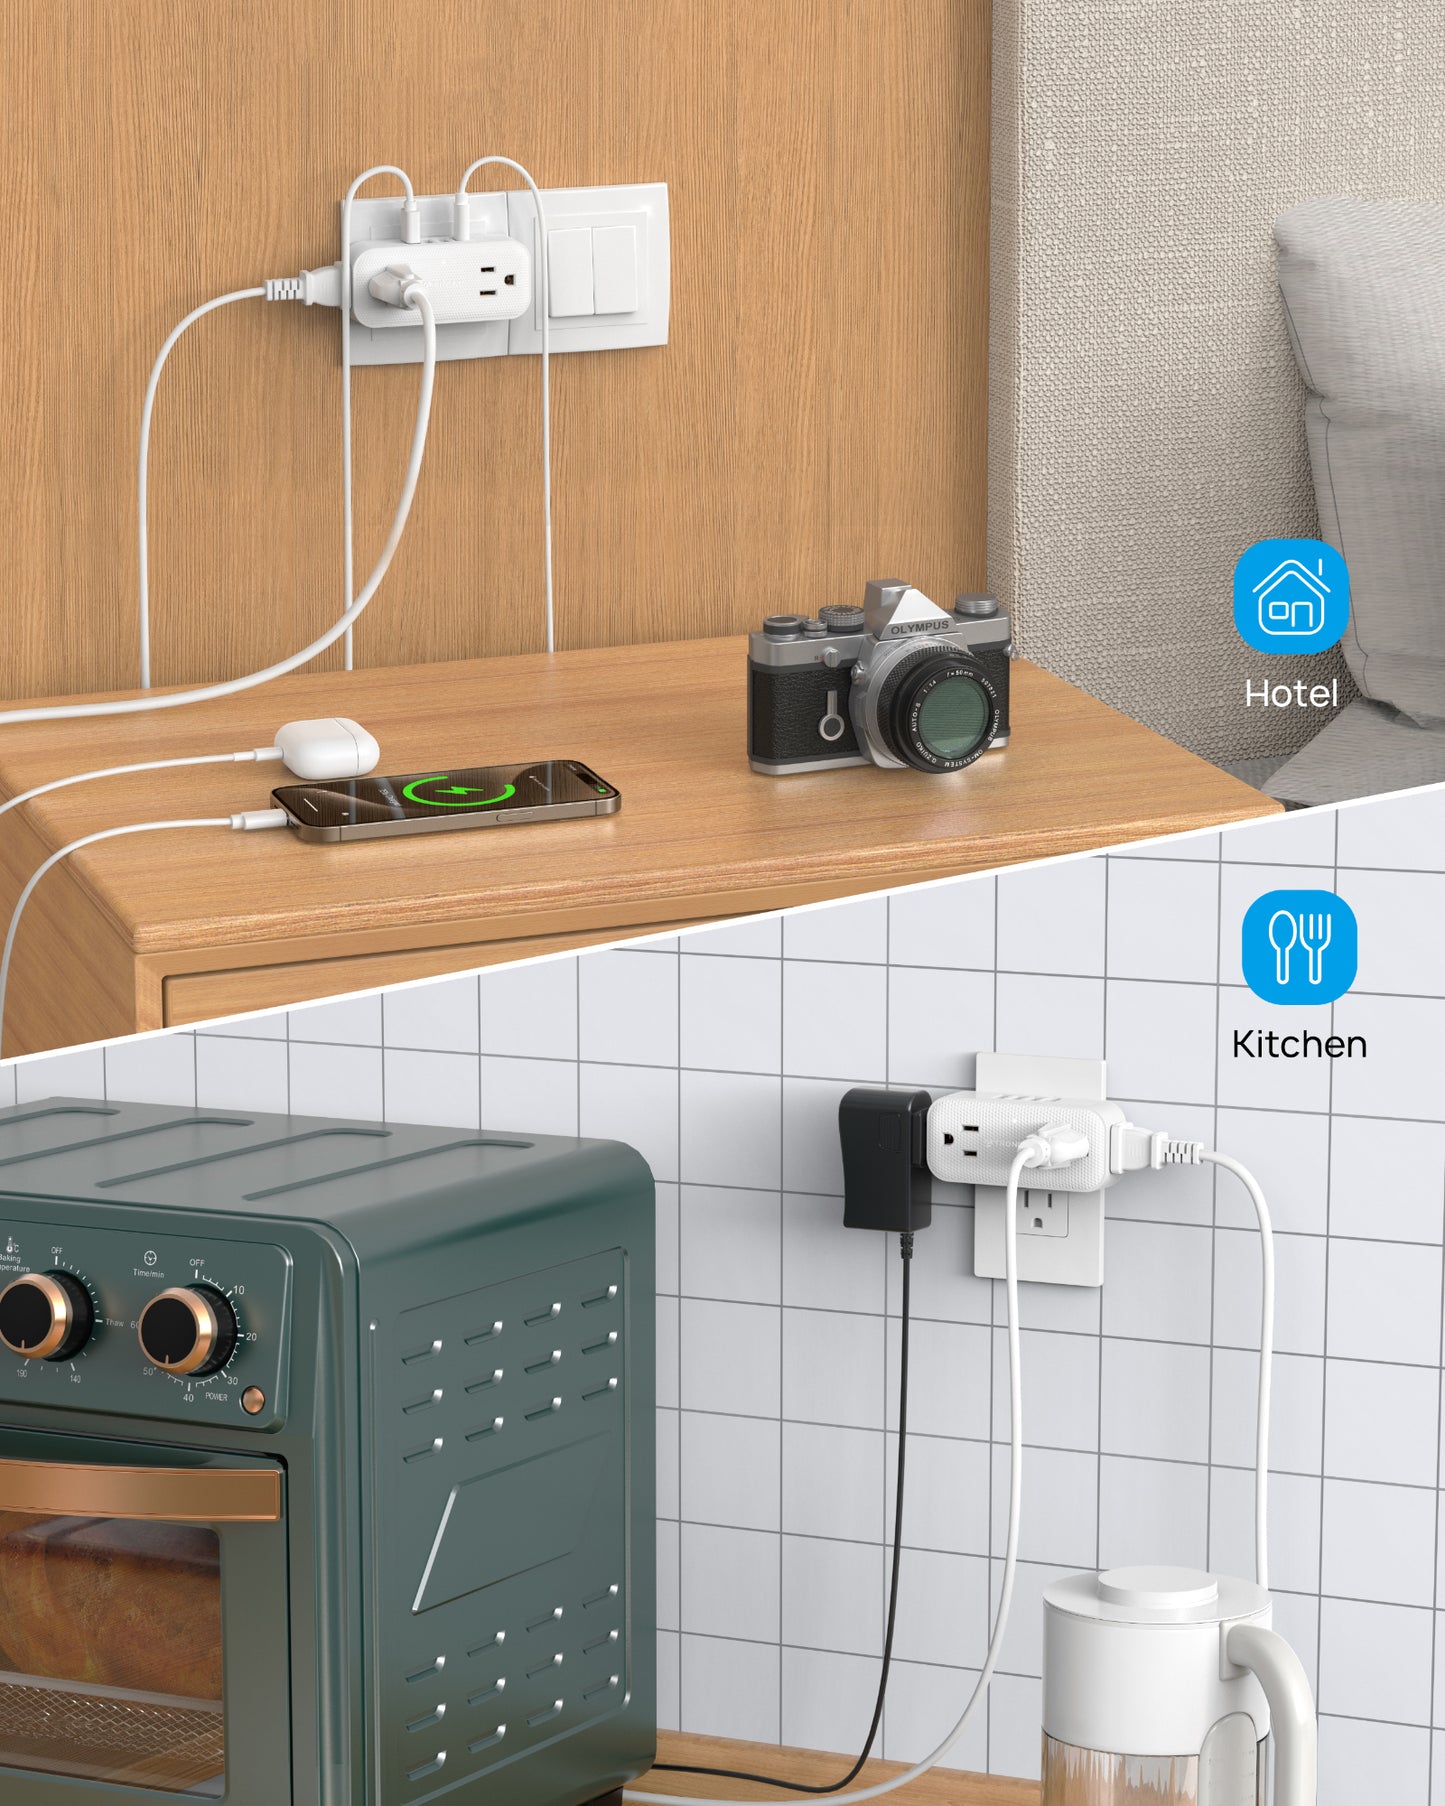 TROND Outlet Extender, Multi Plug Outlet with 4 Electrical Outlets 4 USB Ports